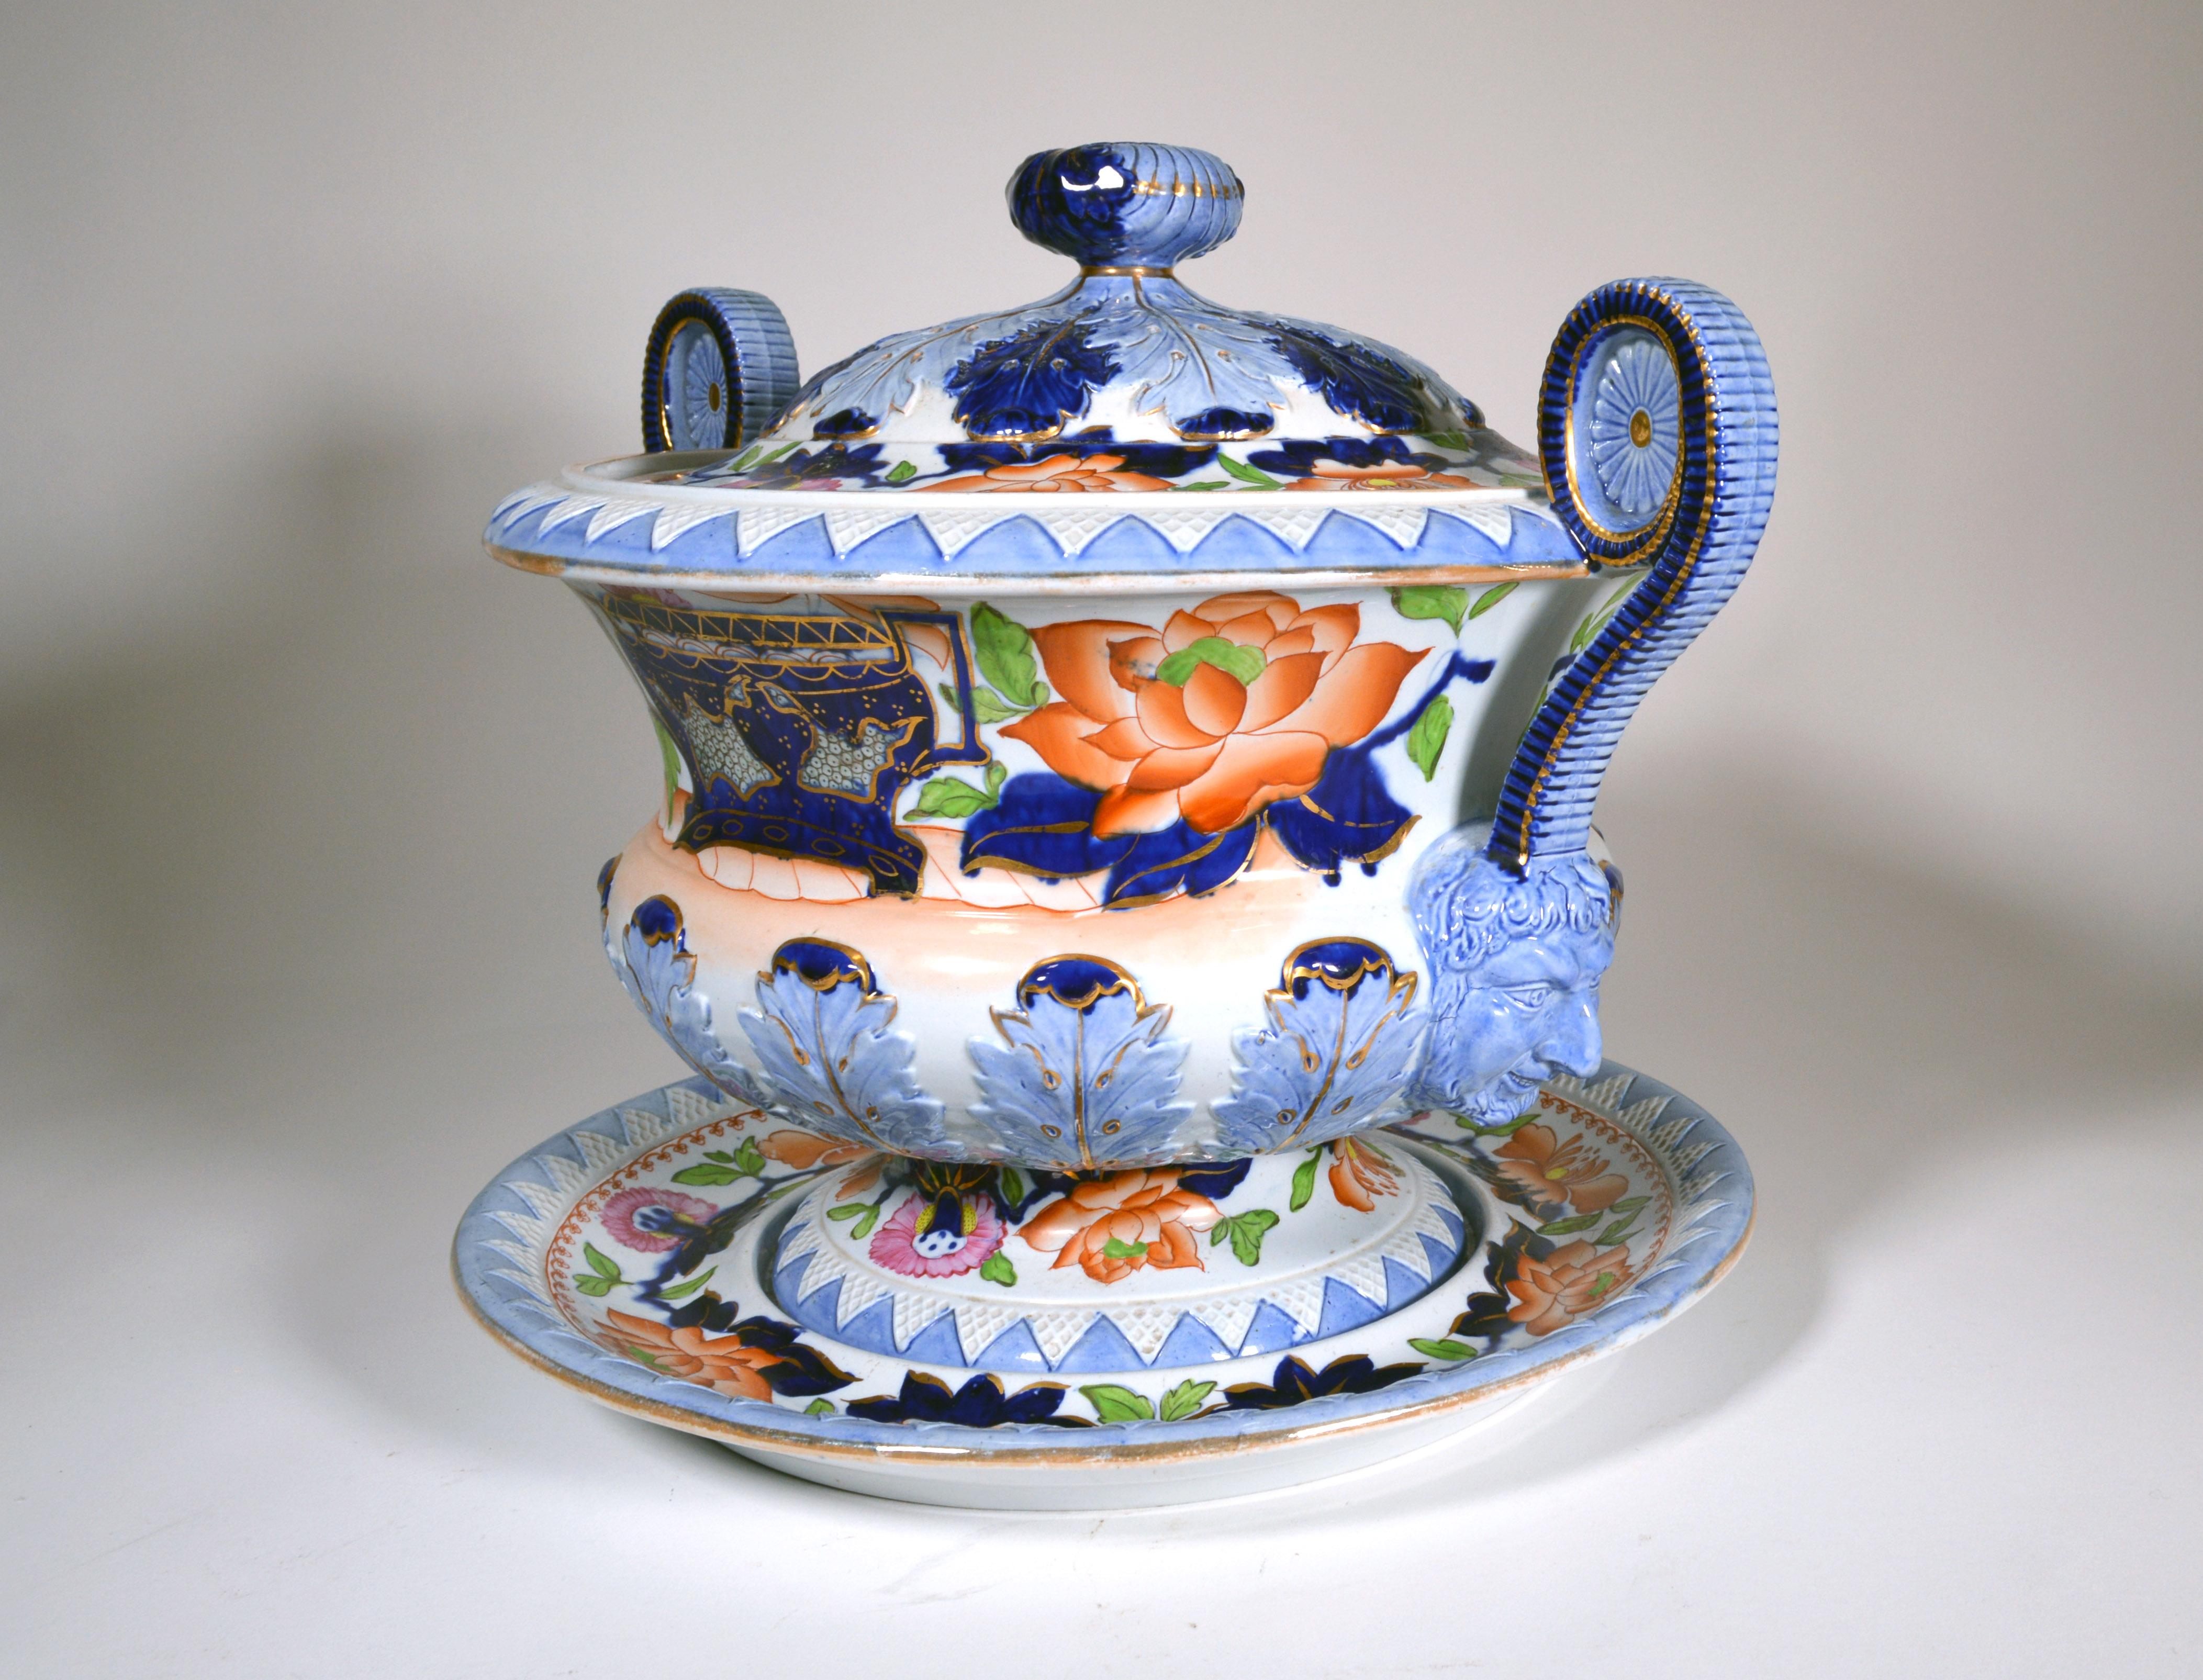 Stone China Soup Tureen. Cover and stand, 
Hicks & Meigh, 
circa 1810-1820 
 

The very large molded and rather dramatic soup tureen cover and stand are painted in Imari colors, The terminals of the handles have a spectacular molded image of